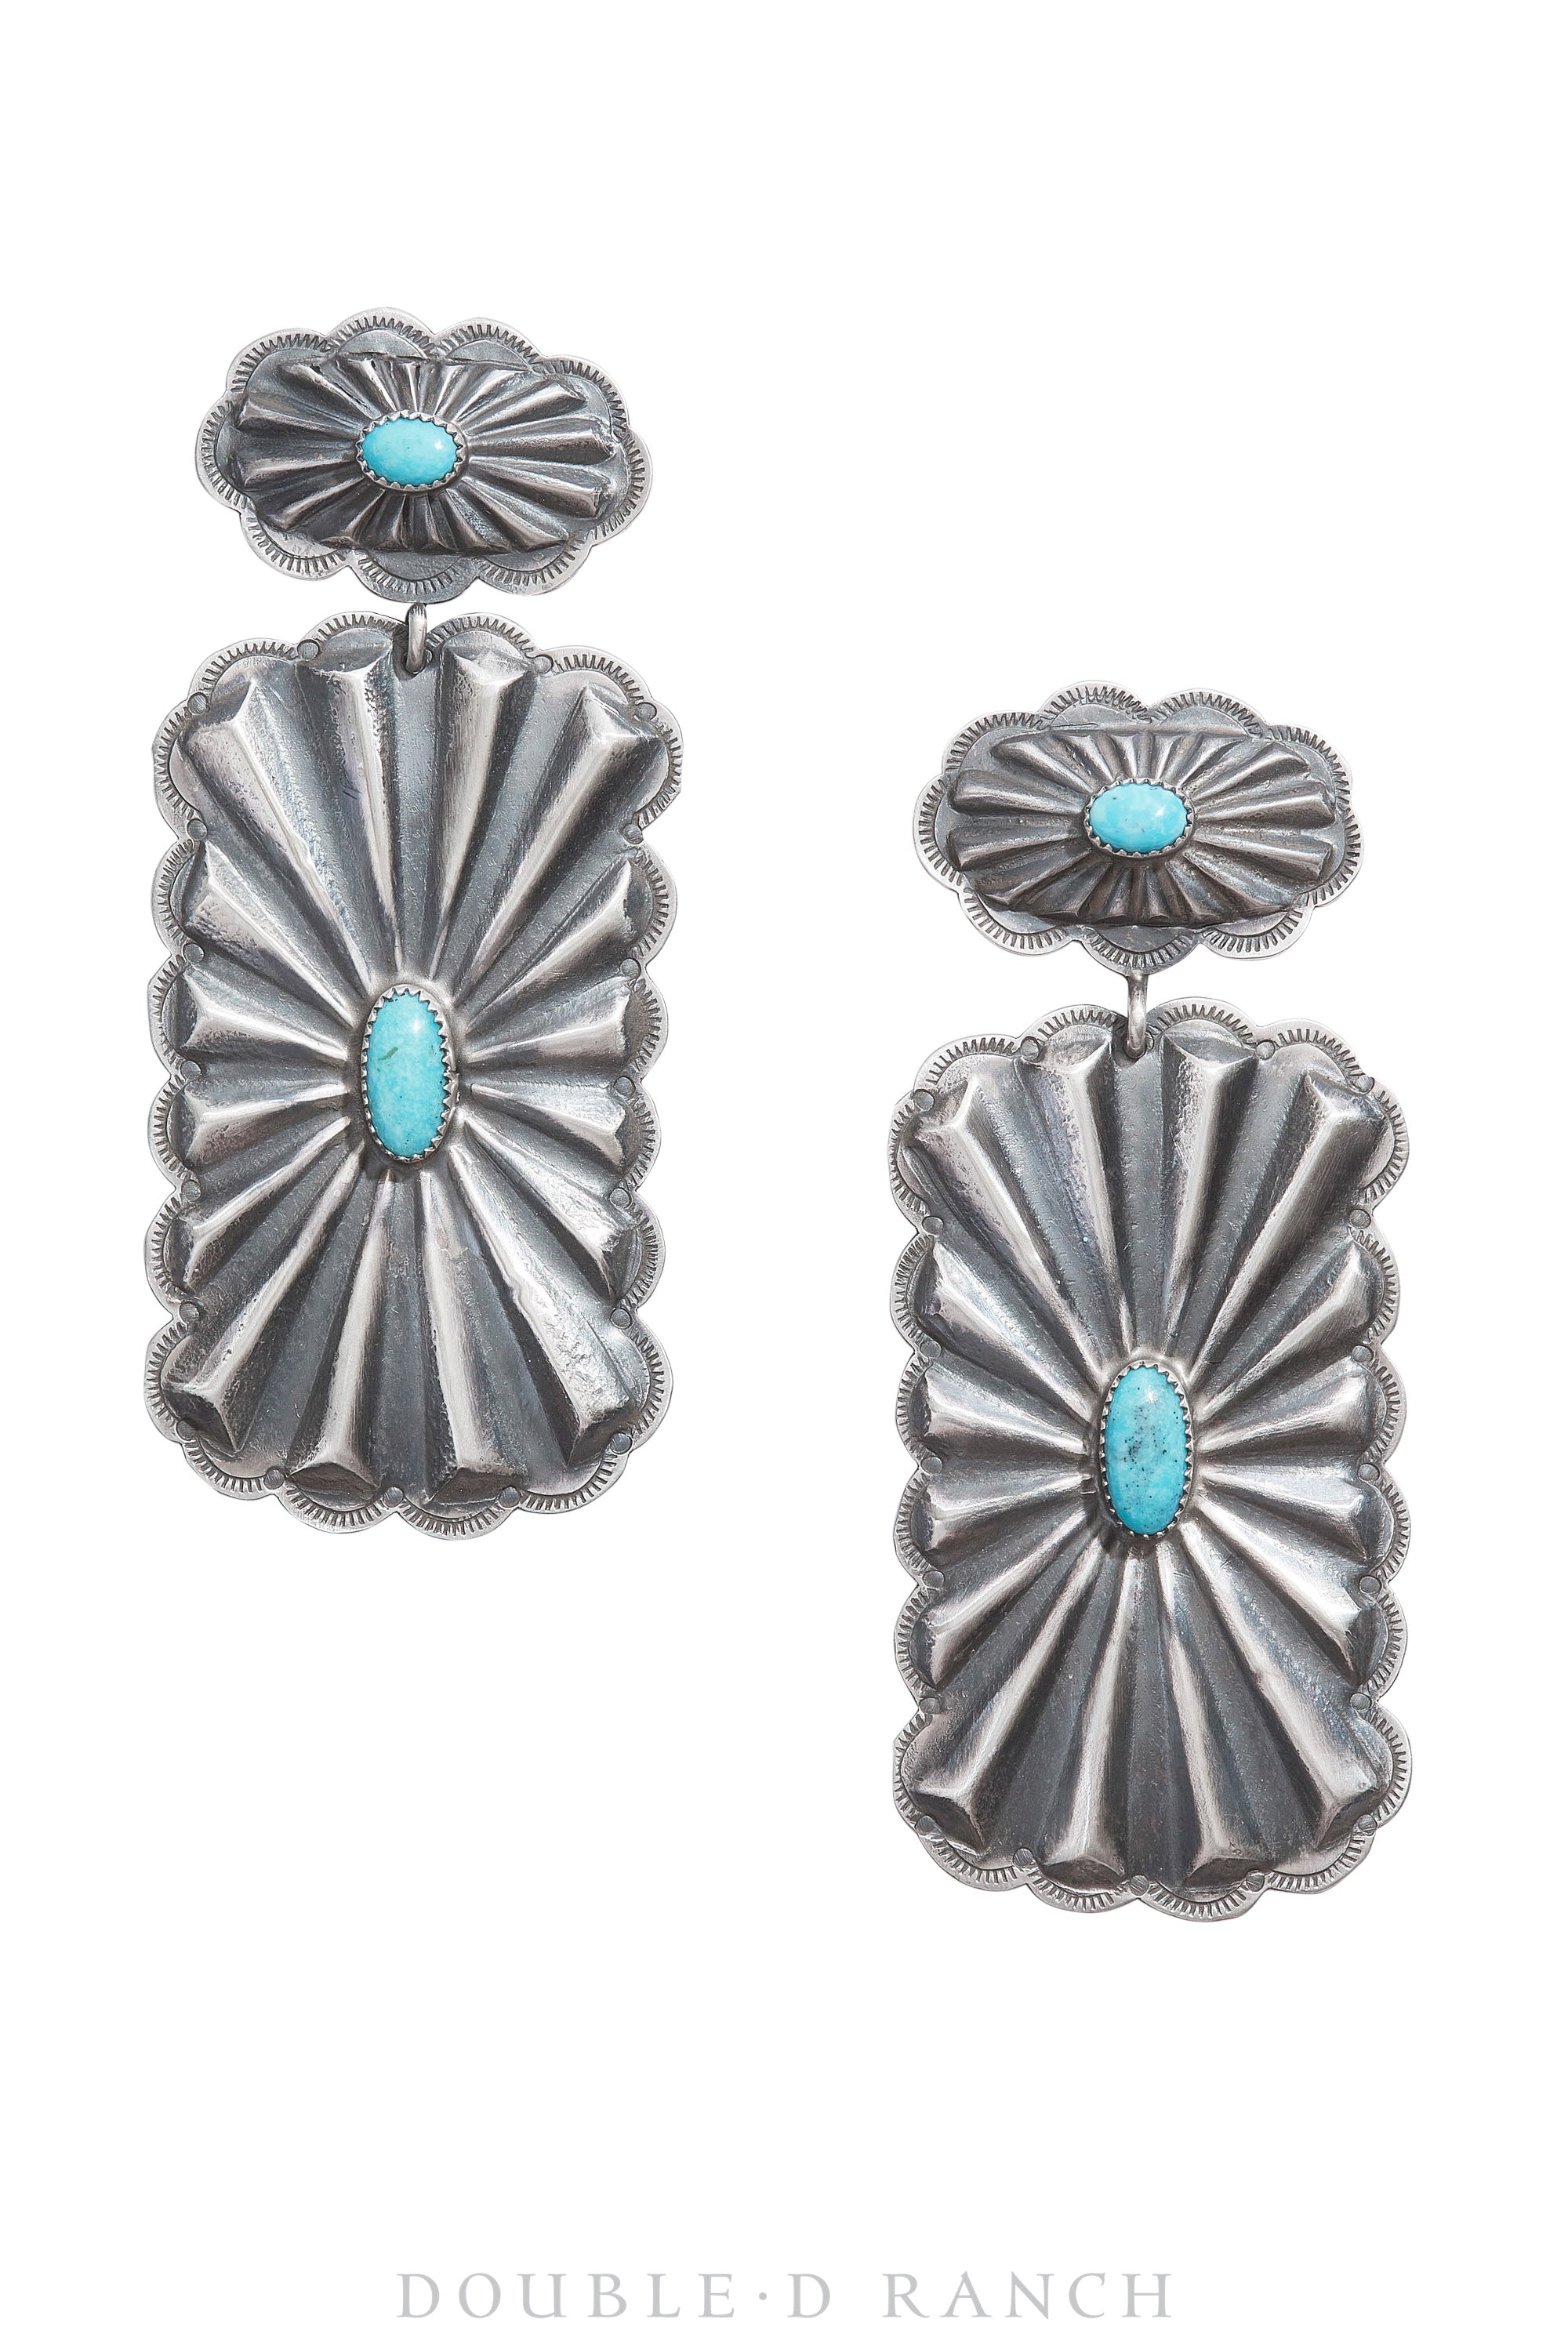 Earrings, Concho, Turquoise & Sterling Silver, Artisan, Hallmark, Contemporary, 1067